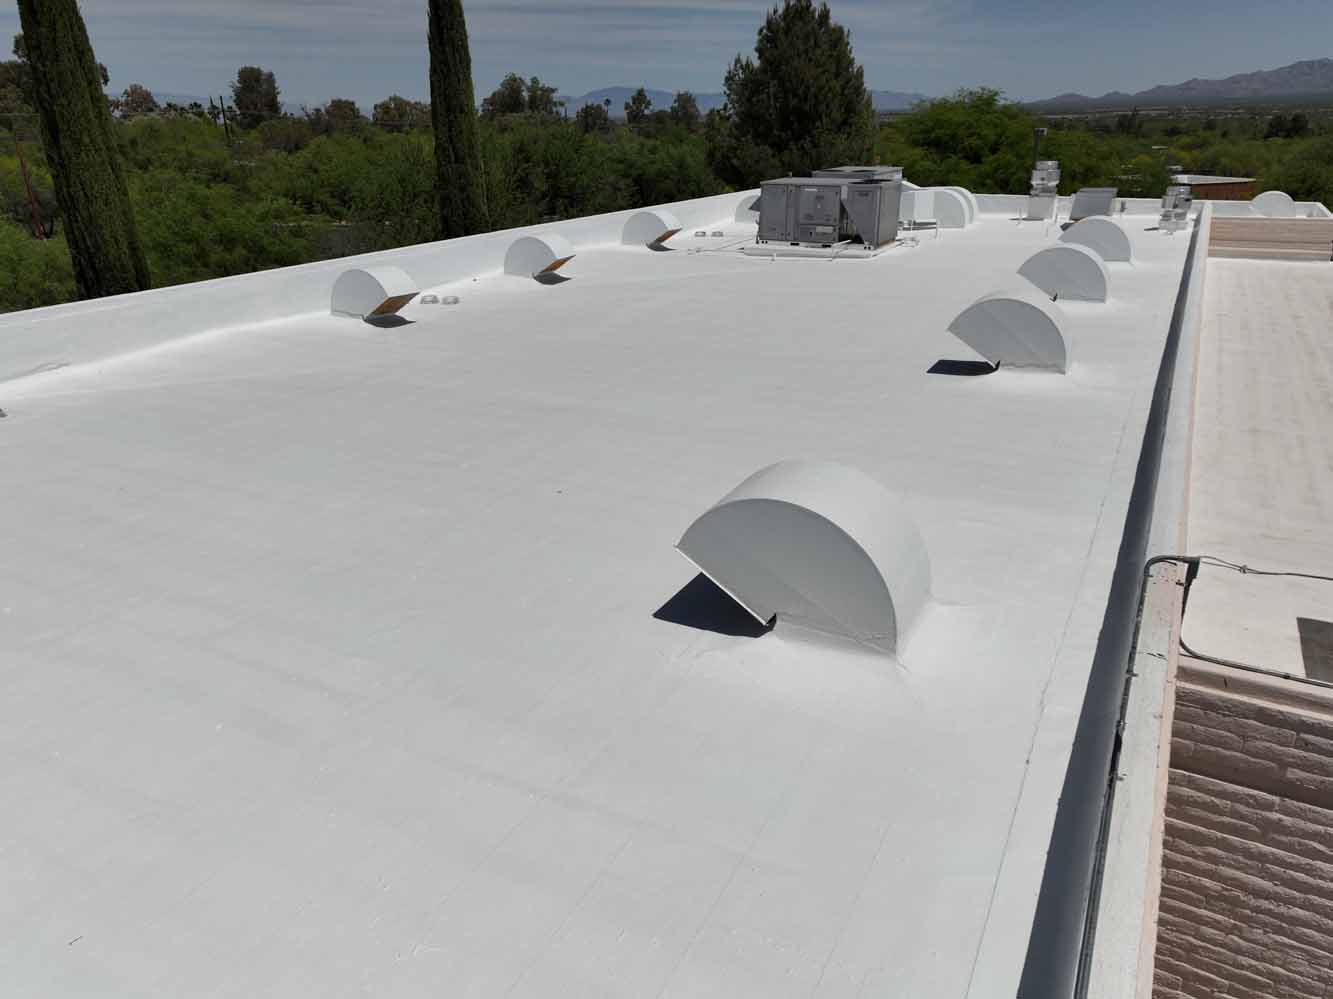 Commercial Roofing Project in Arizona